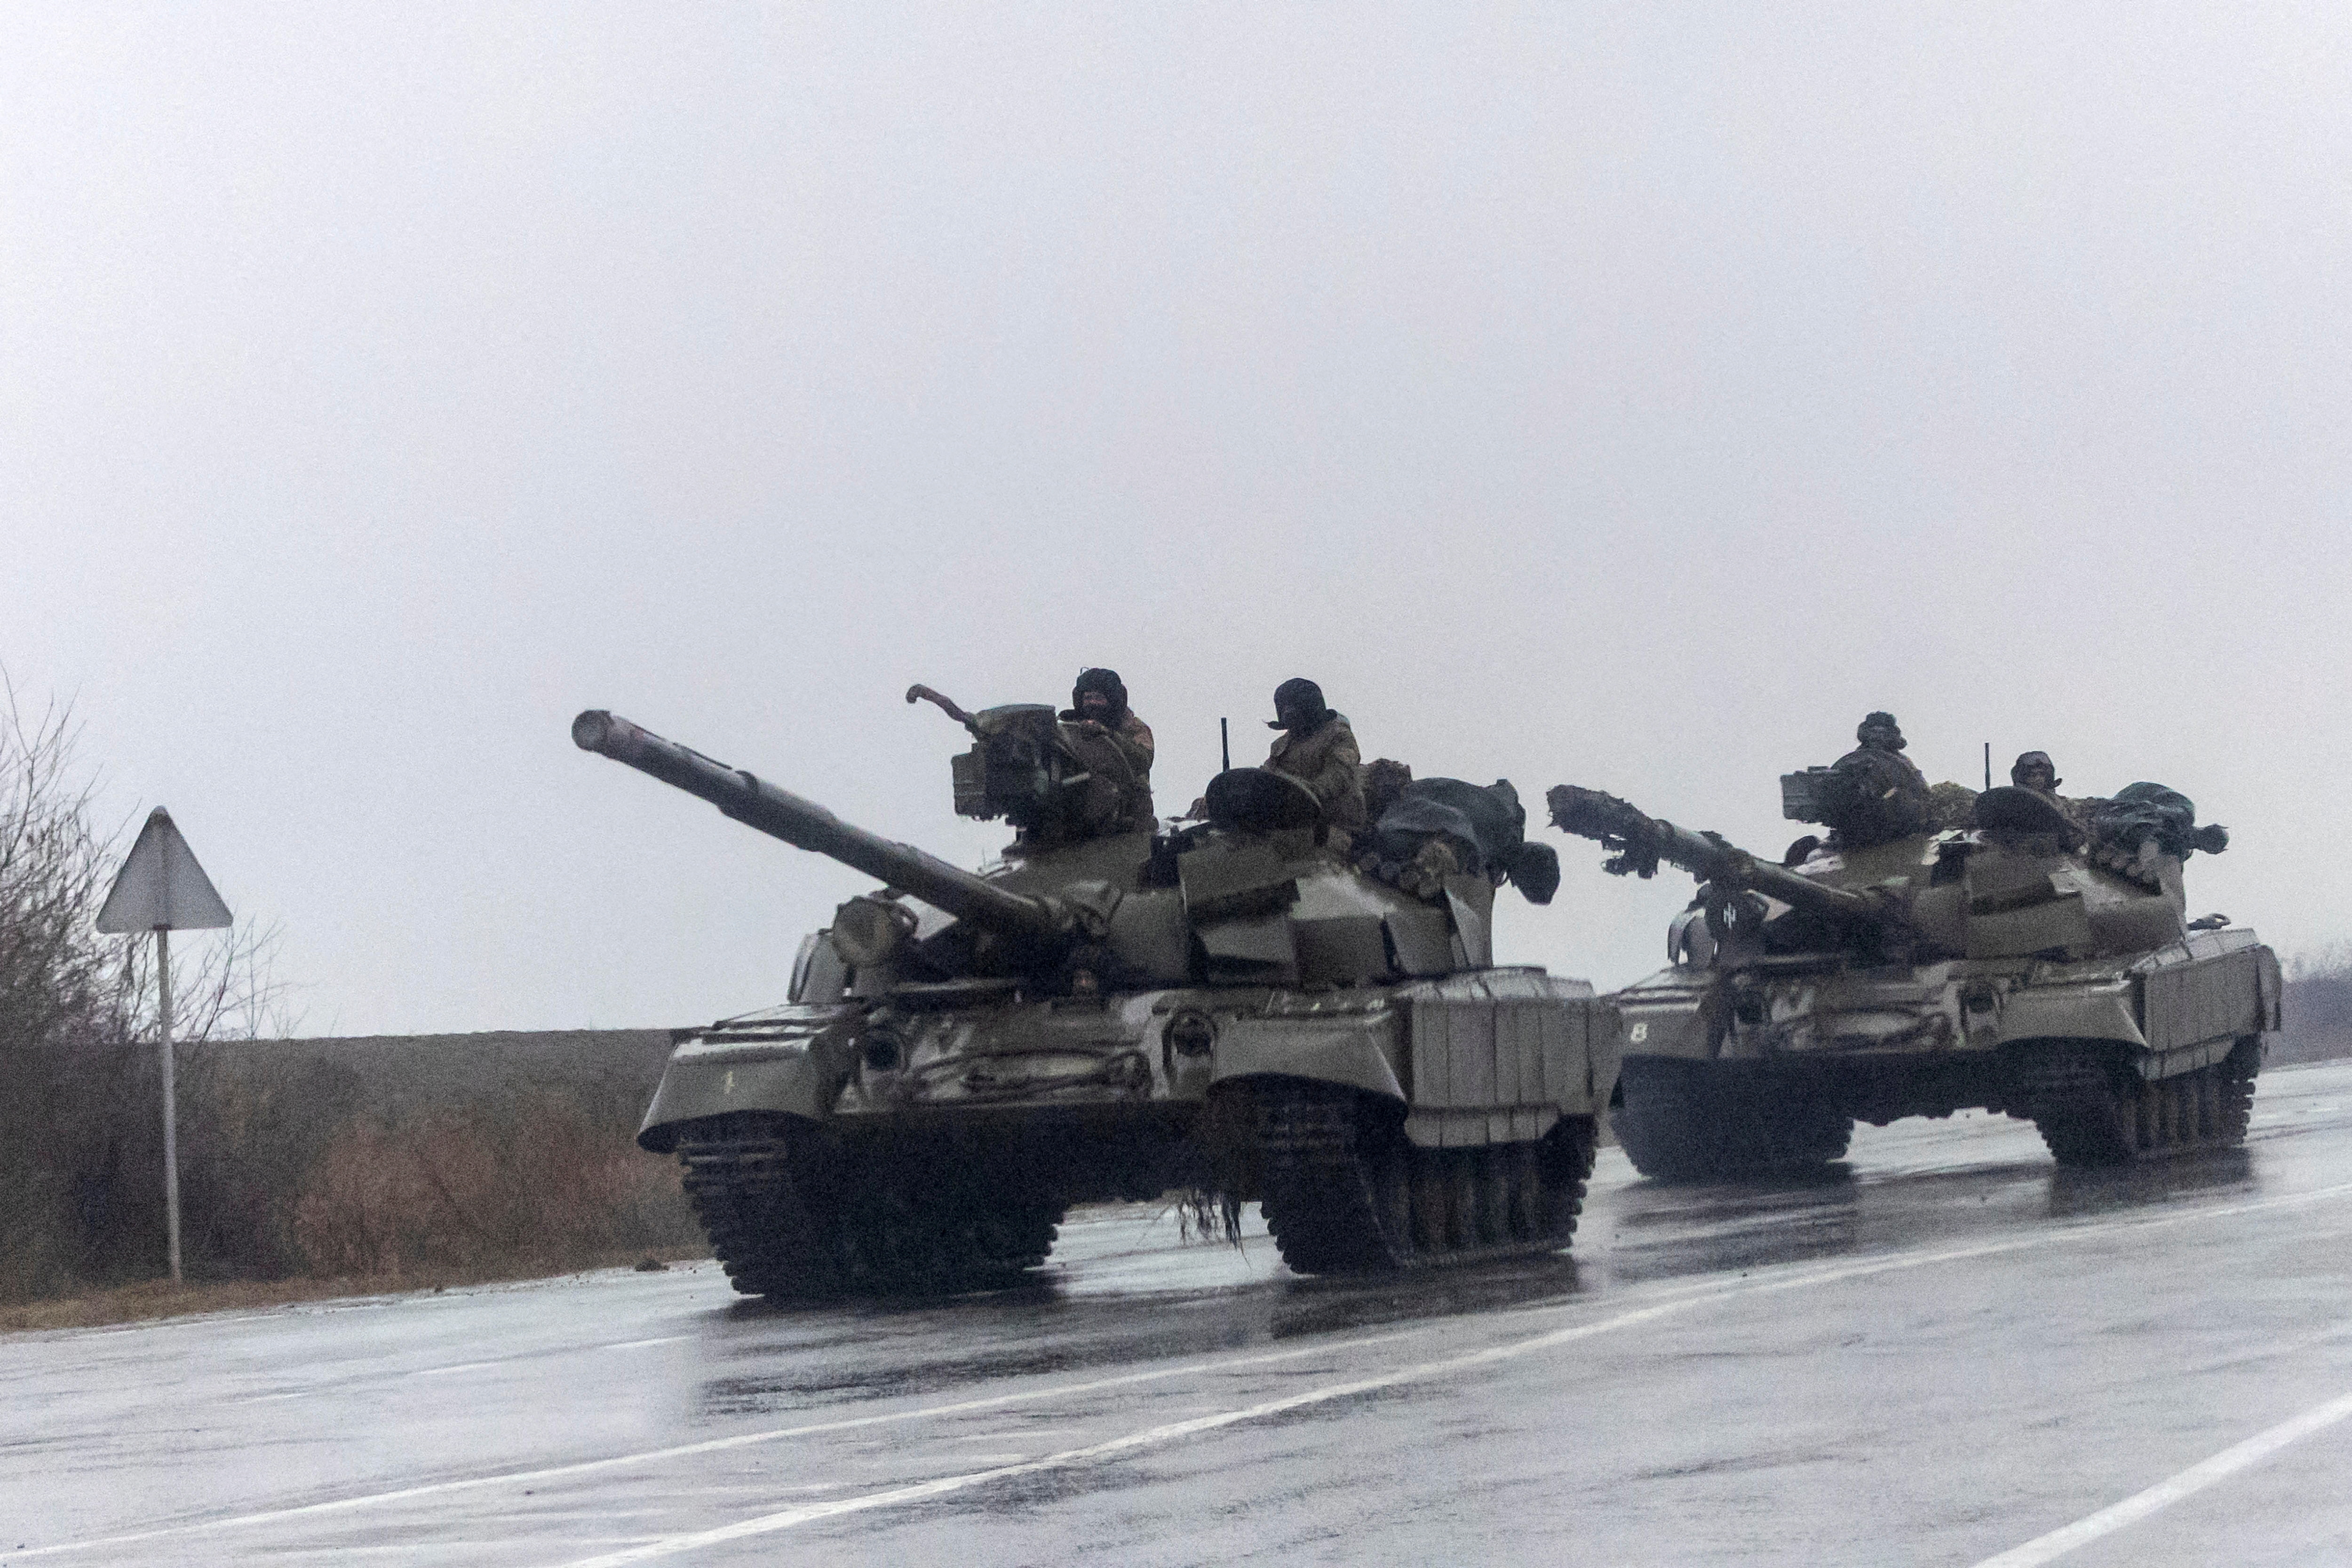 Ukrainian tanks move into the city, after Russian President Vladimir Putin authorized a military operation in eastern Ukraine, in Mariupol, February 24, 2022. REUTERS/Carlos Barria